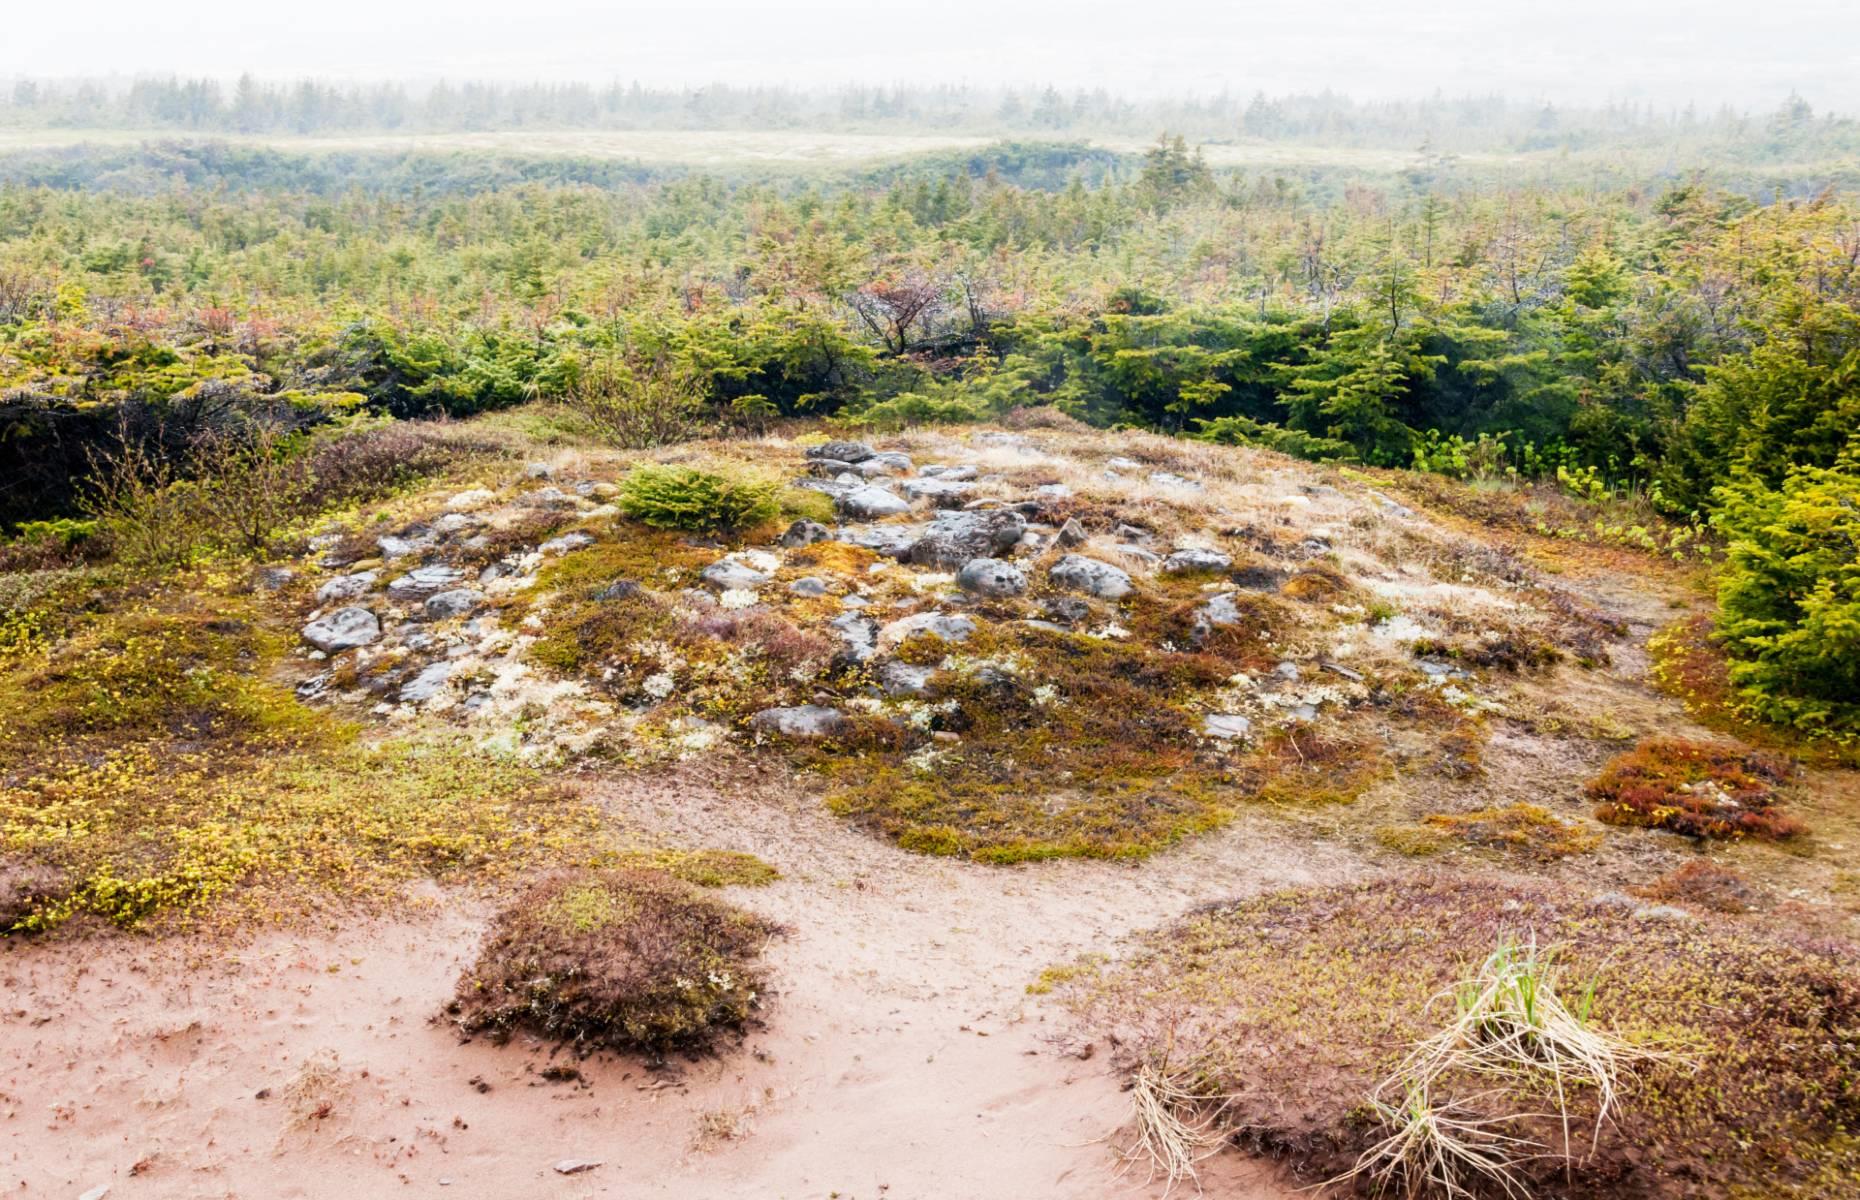 <p>This burial mound on the coast of southern Labrador is the oldest known funerary monument in North America, marking the grave of an adolescent boy who belonged to the Maritime Archaic people and died around 5,500 BC. The body was covered with red ochre, wrapped in birch bark and placed in a large pit flanked by fires. Walrus tusks, harpoon heads, paint stones and a bone whistle were then interred with him, beneath a 26-foot-wide (8m) mound that probably took the local tribe at least a week to create. Archaeologists excavated the site in 1974 before restoring the mound’s original shape for modern-day visitors to admire.</p>